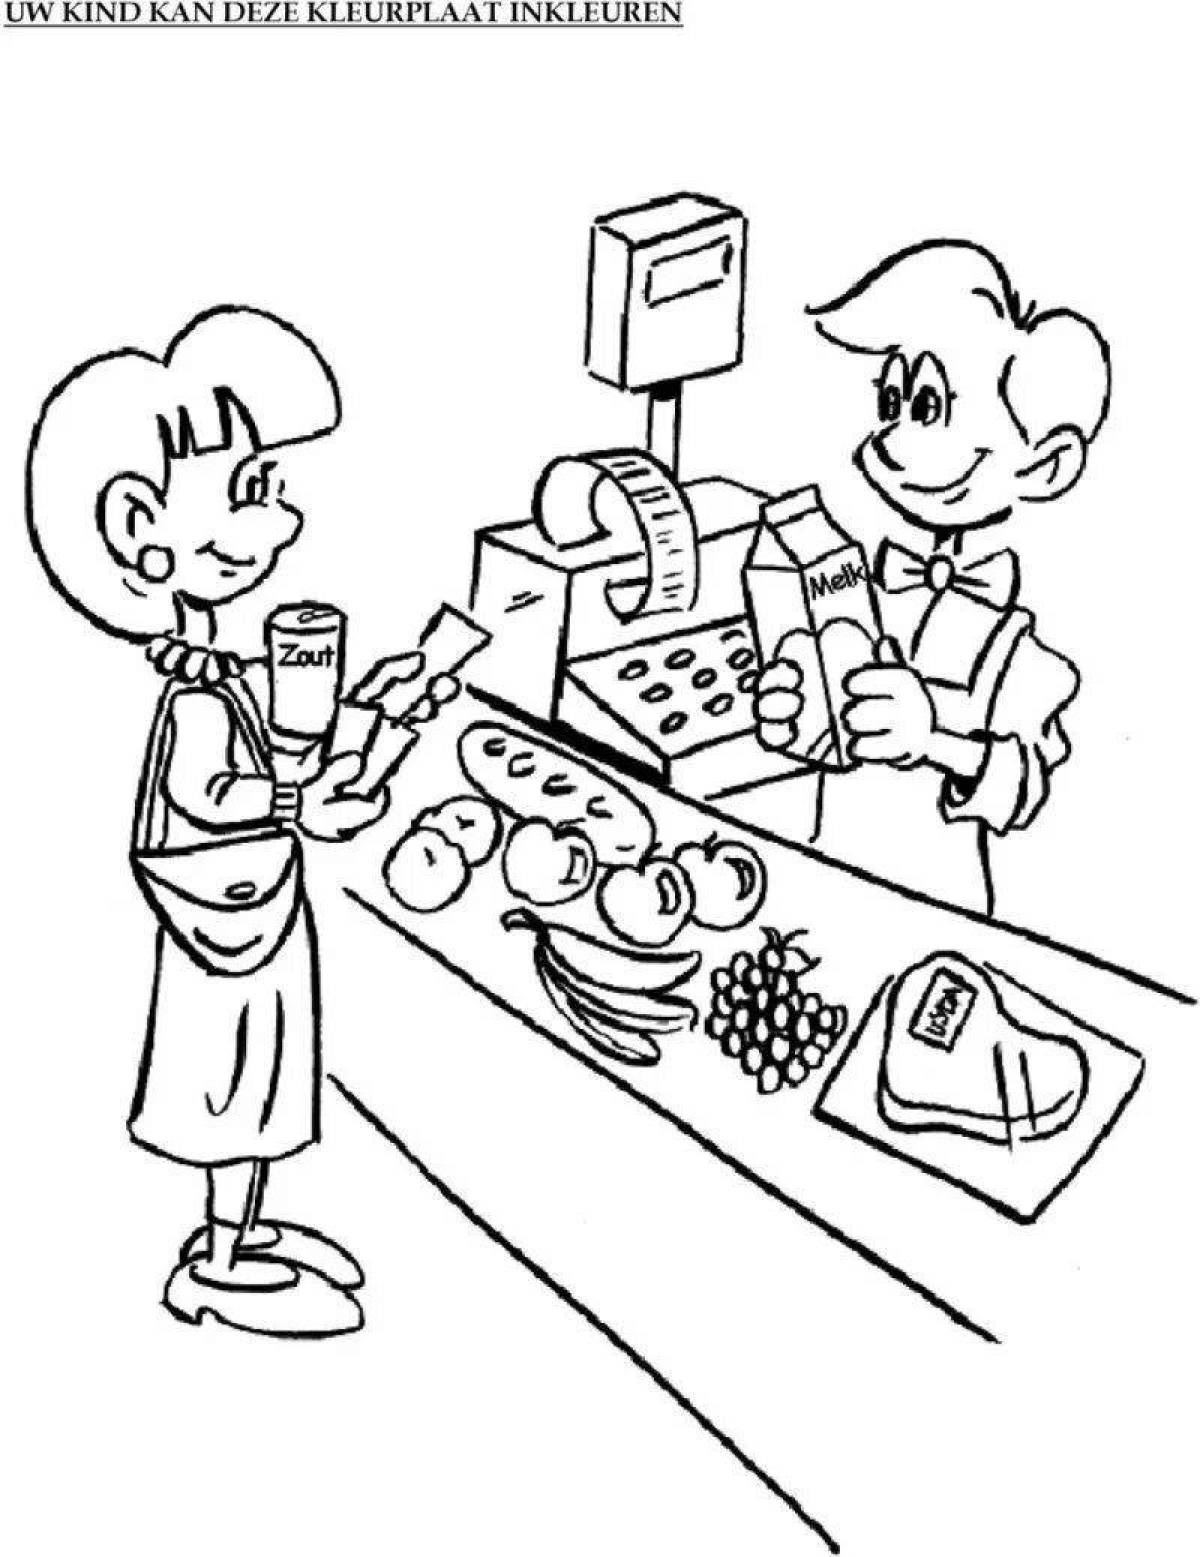 Bright coloring book on financial literacy grade 3